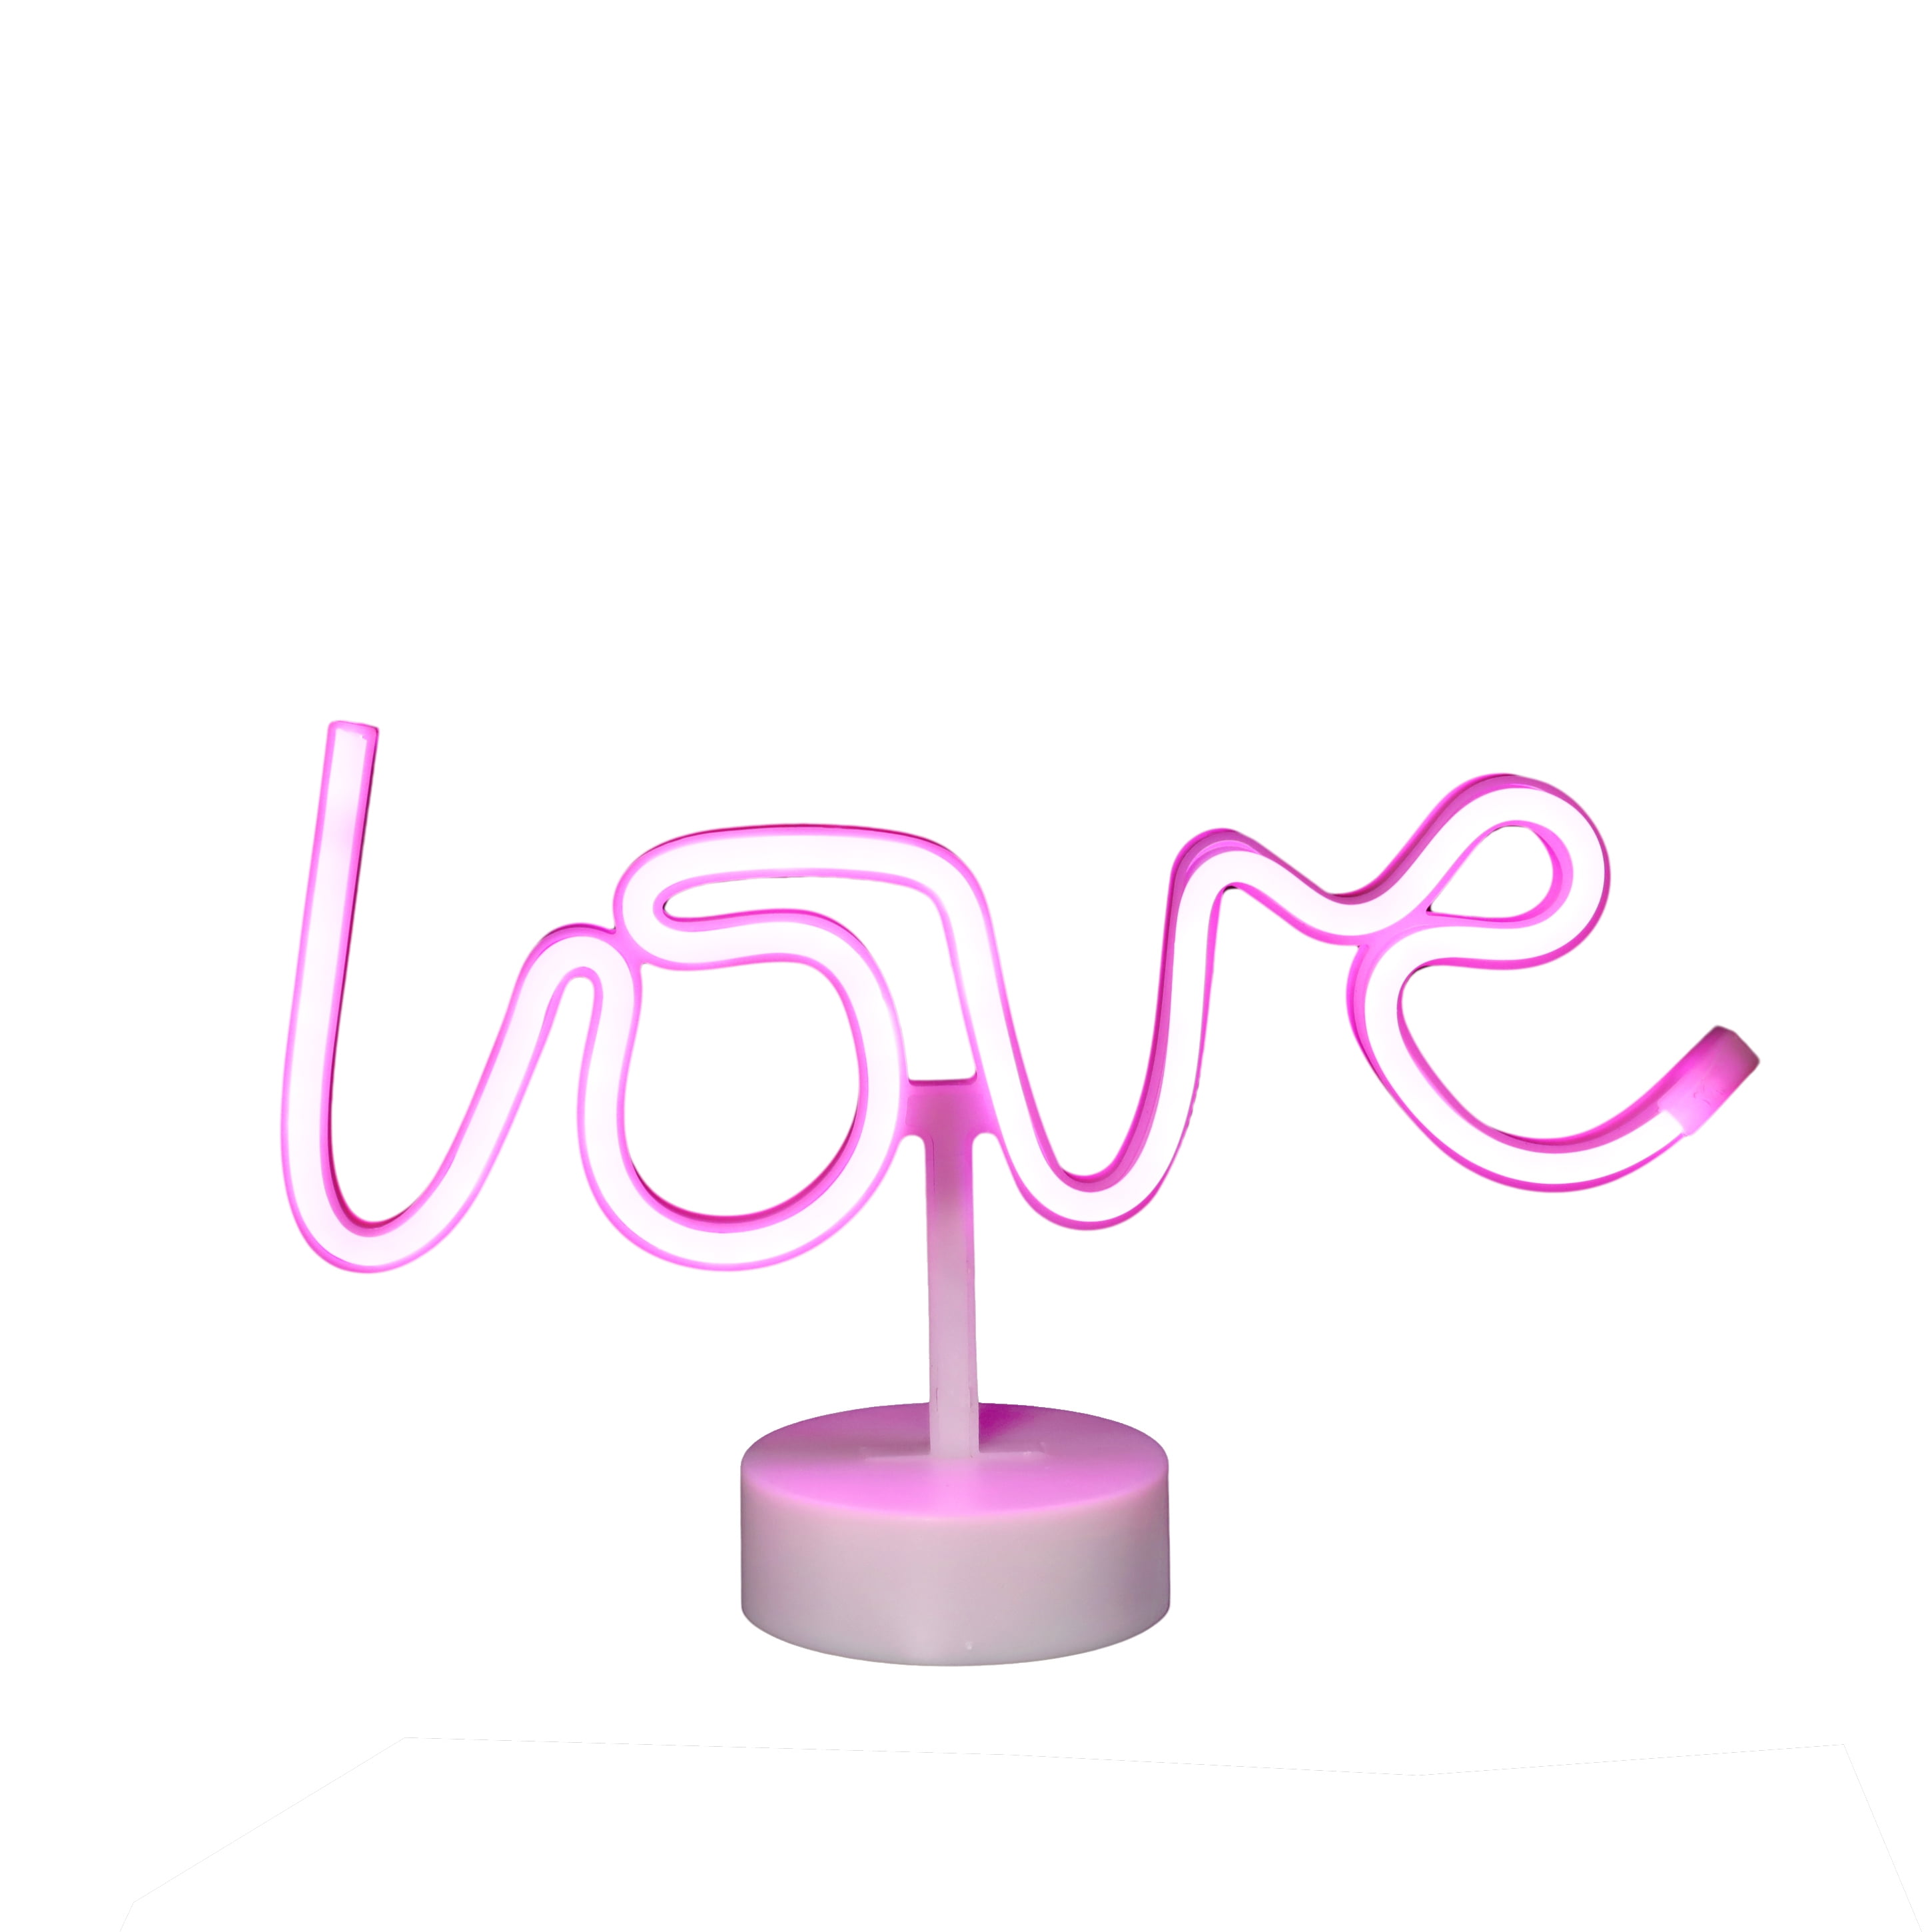 Selvrespekt erindringer Serrated EZ-Illuminations Indoor Battery Operated Pink LED Neon-Style Love Light,  with Built-in Timer - Walmart.com